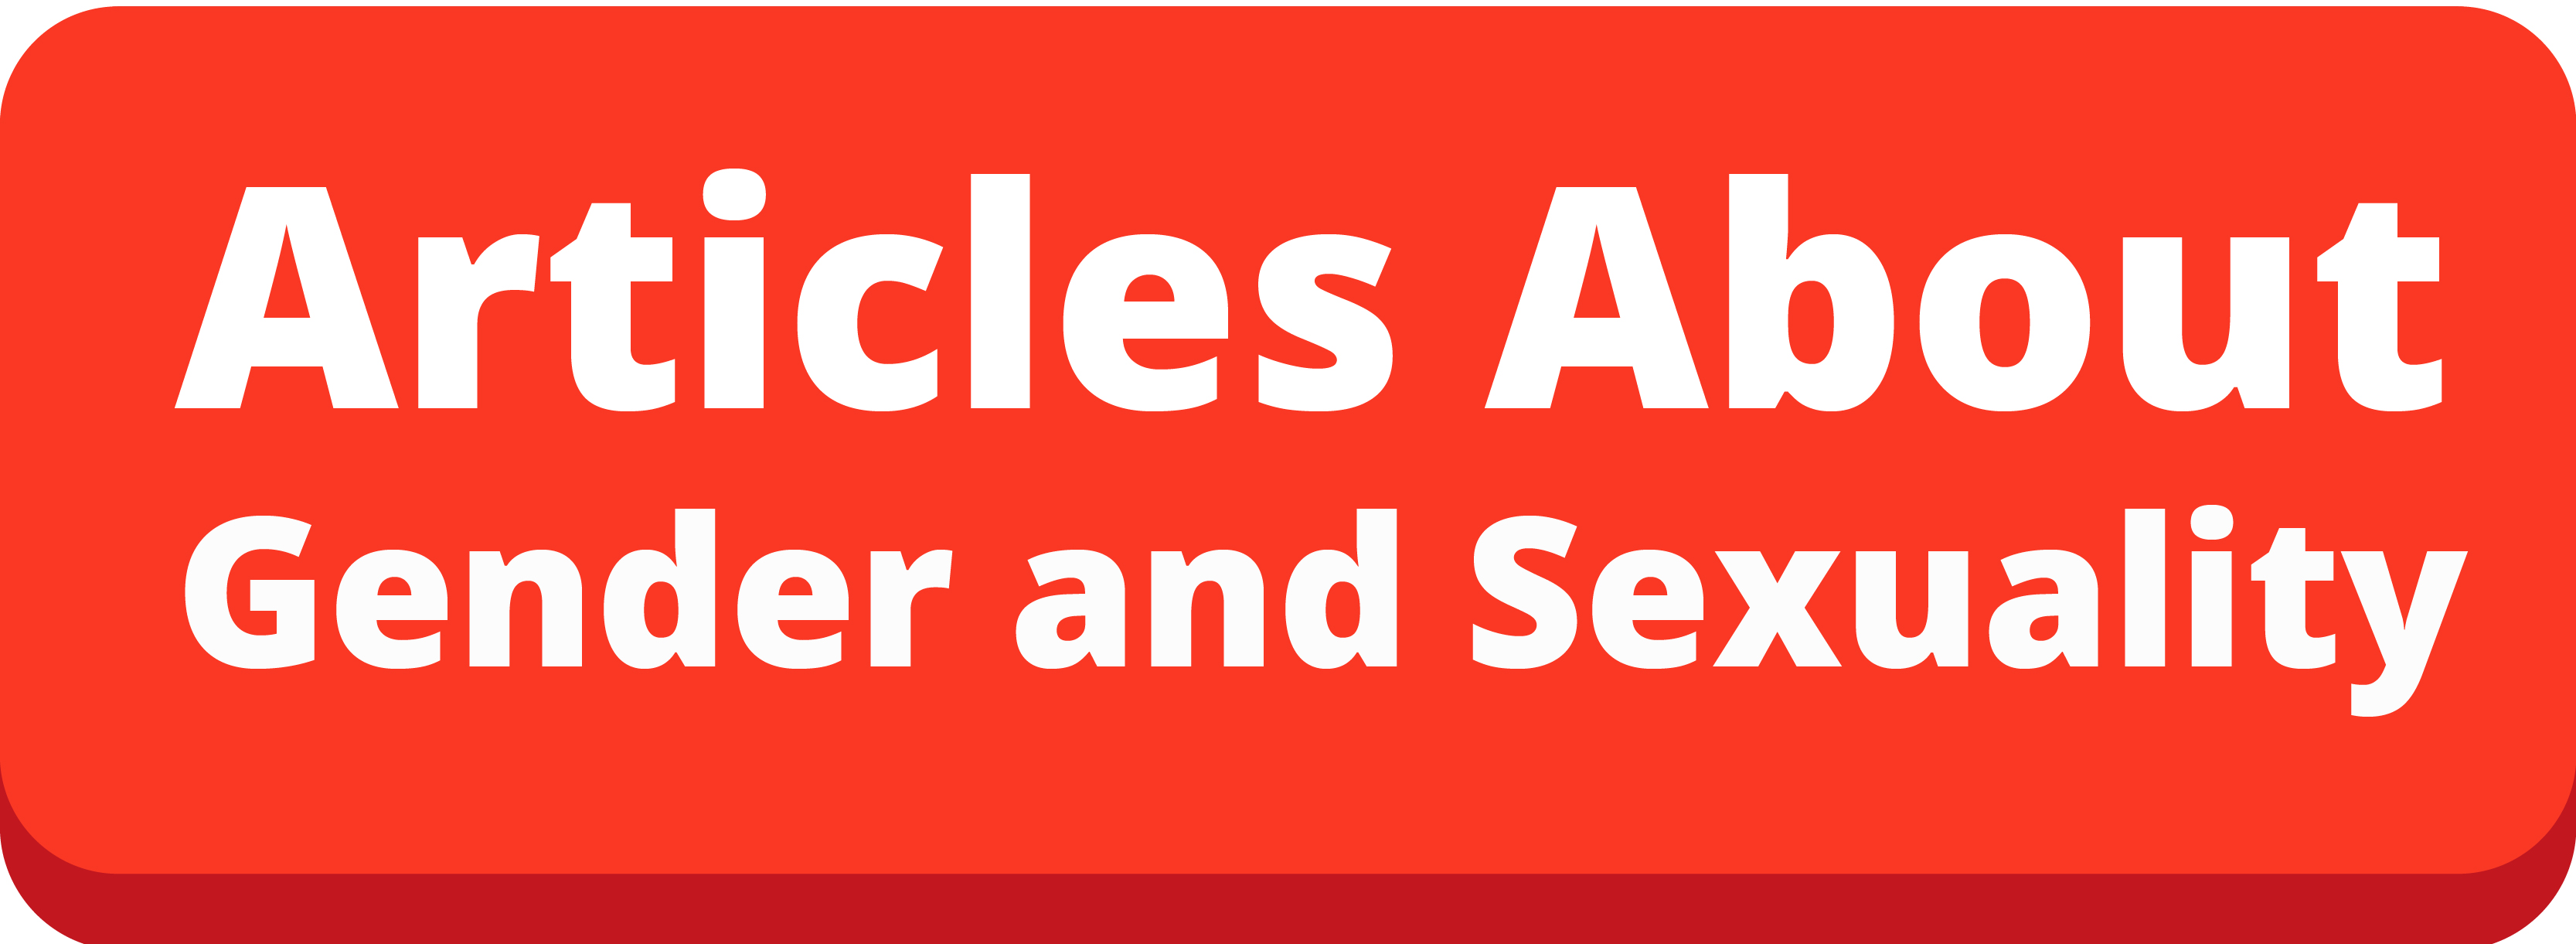 Articles About Gender and Sexuality